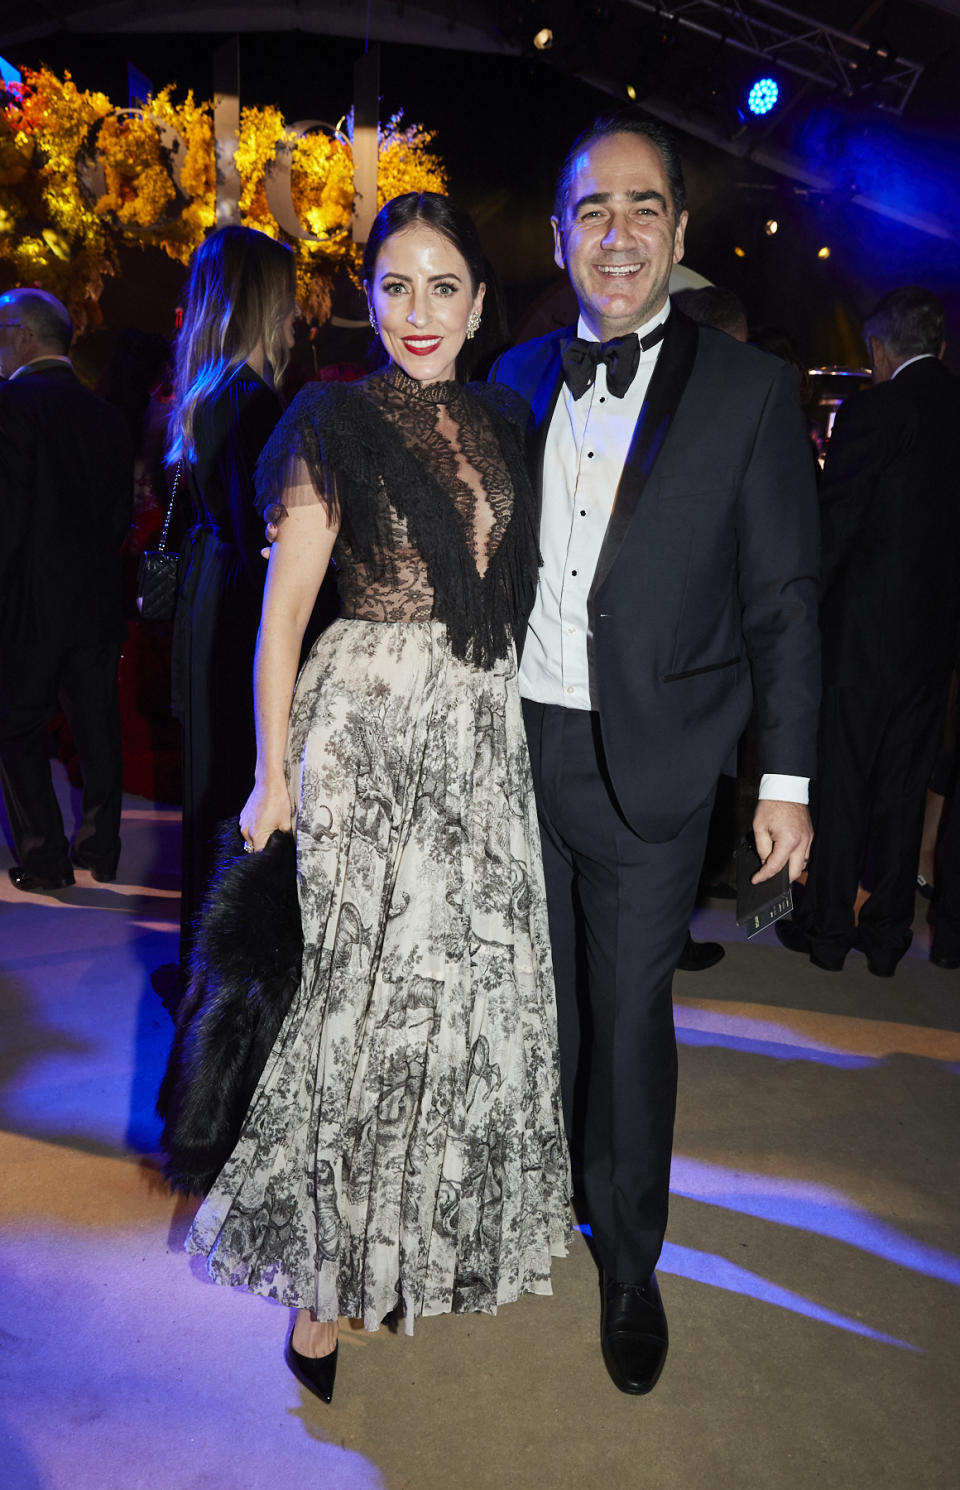 Michael 'Wippa' Wipfli and wife Lisa Wipfli attend Gold Dinner 2021 on June 10, 2021 in Sydney, Australia. Photo: Getty Images.